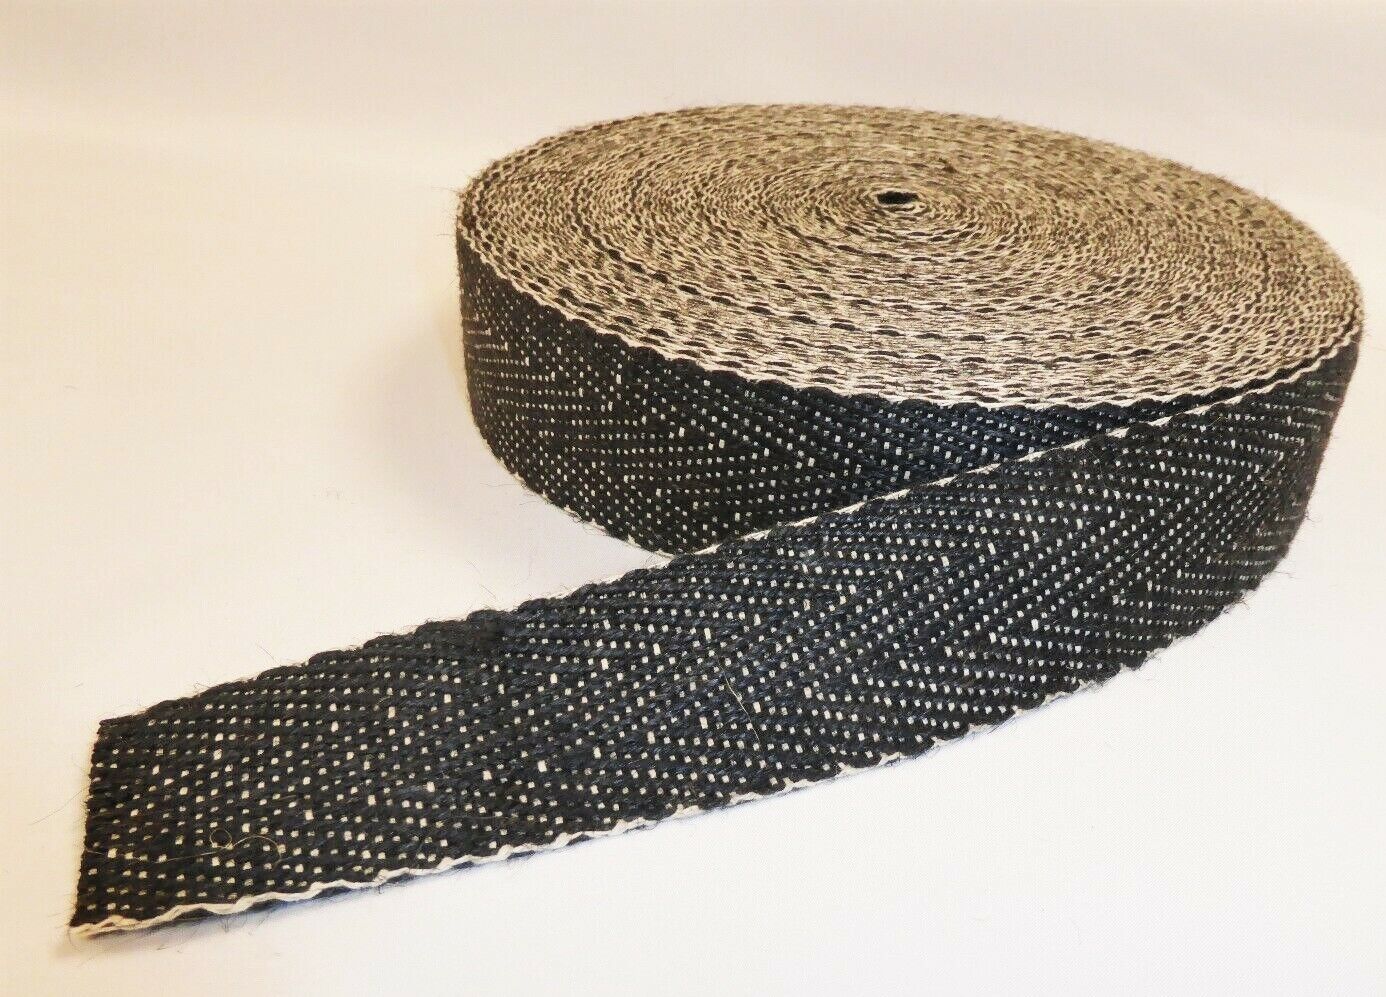 BLACK and WHITE UPHOLSTERY WEBBING - 2 inch 50mm wide